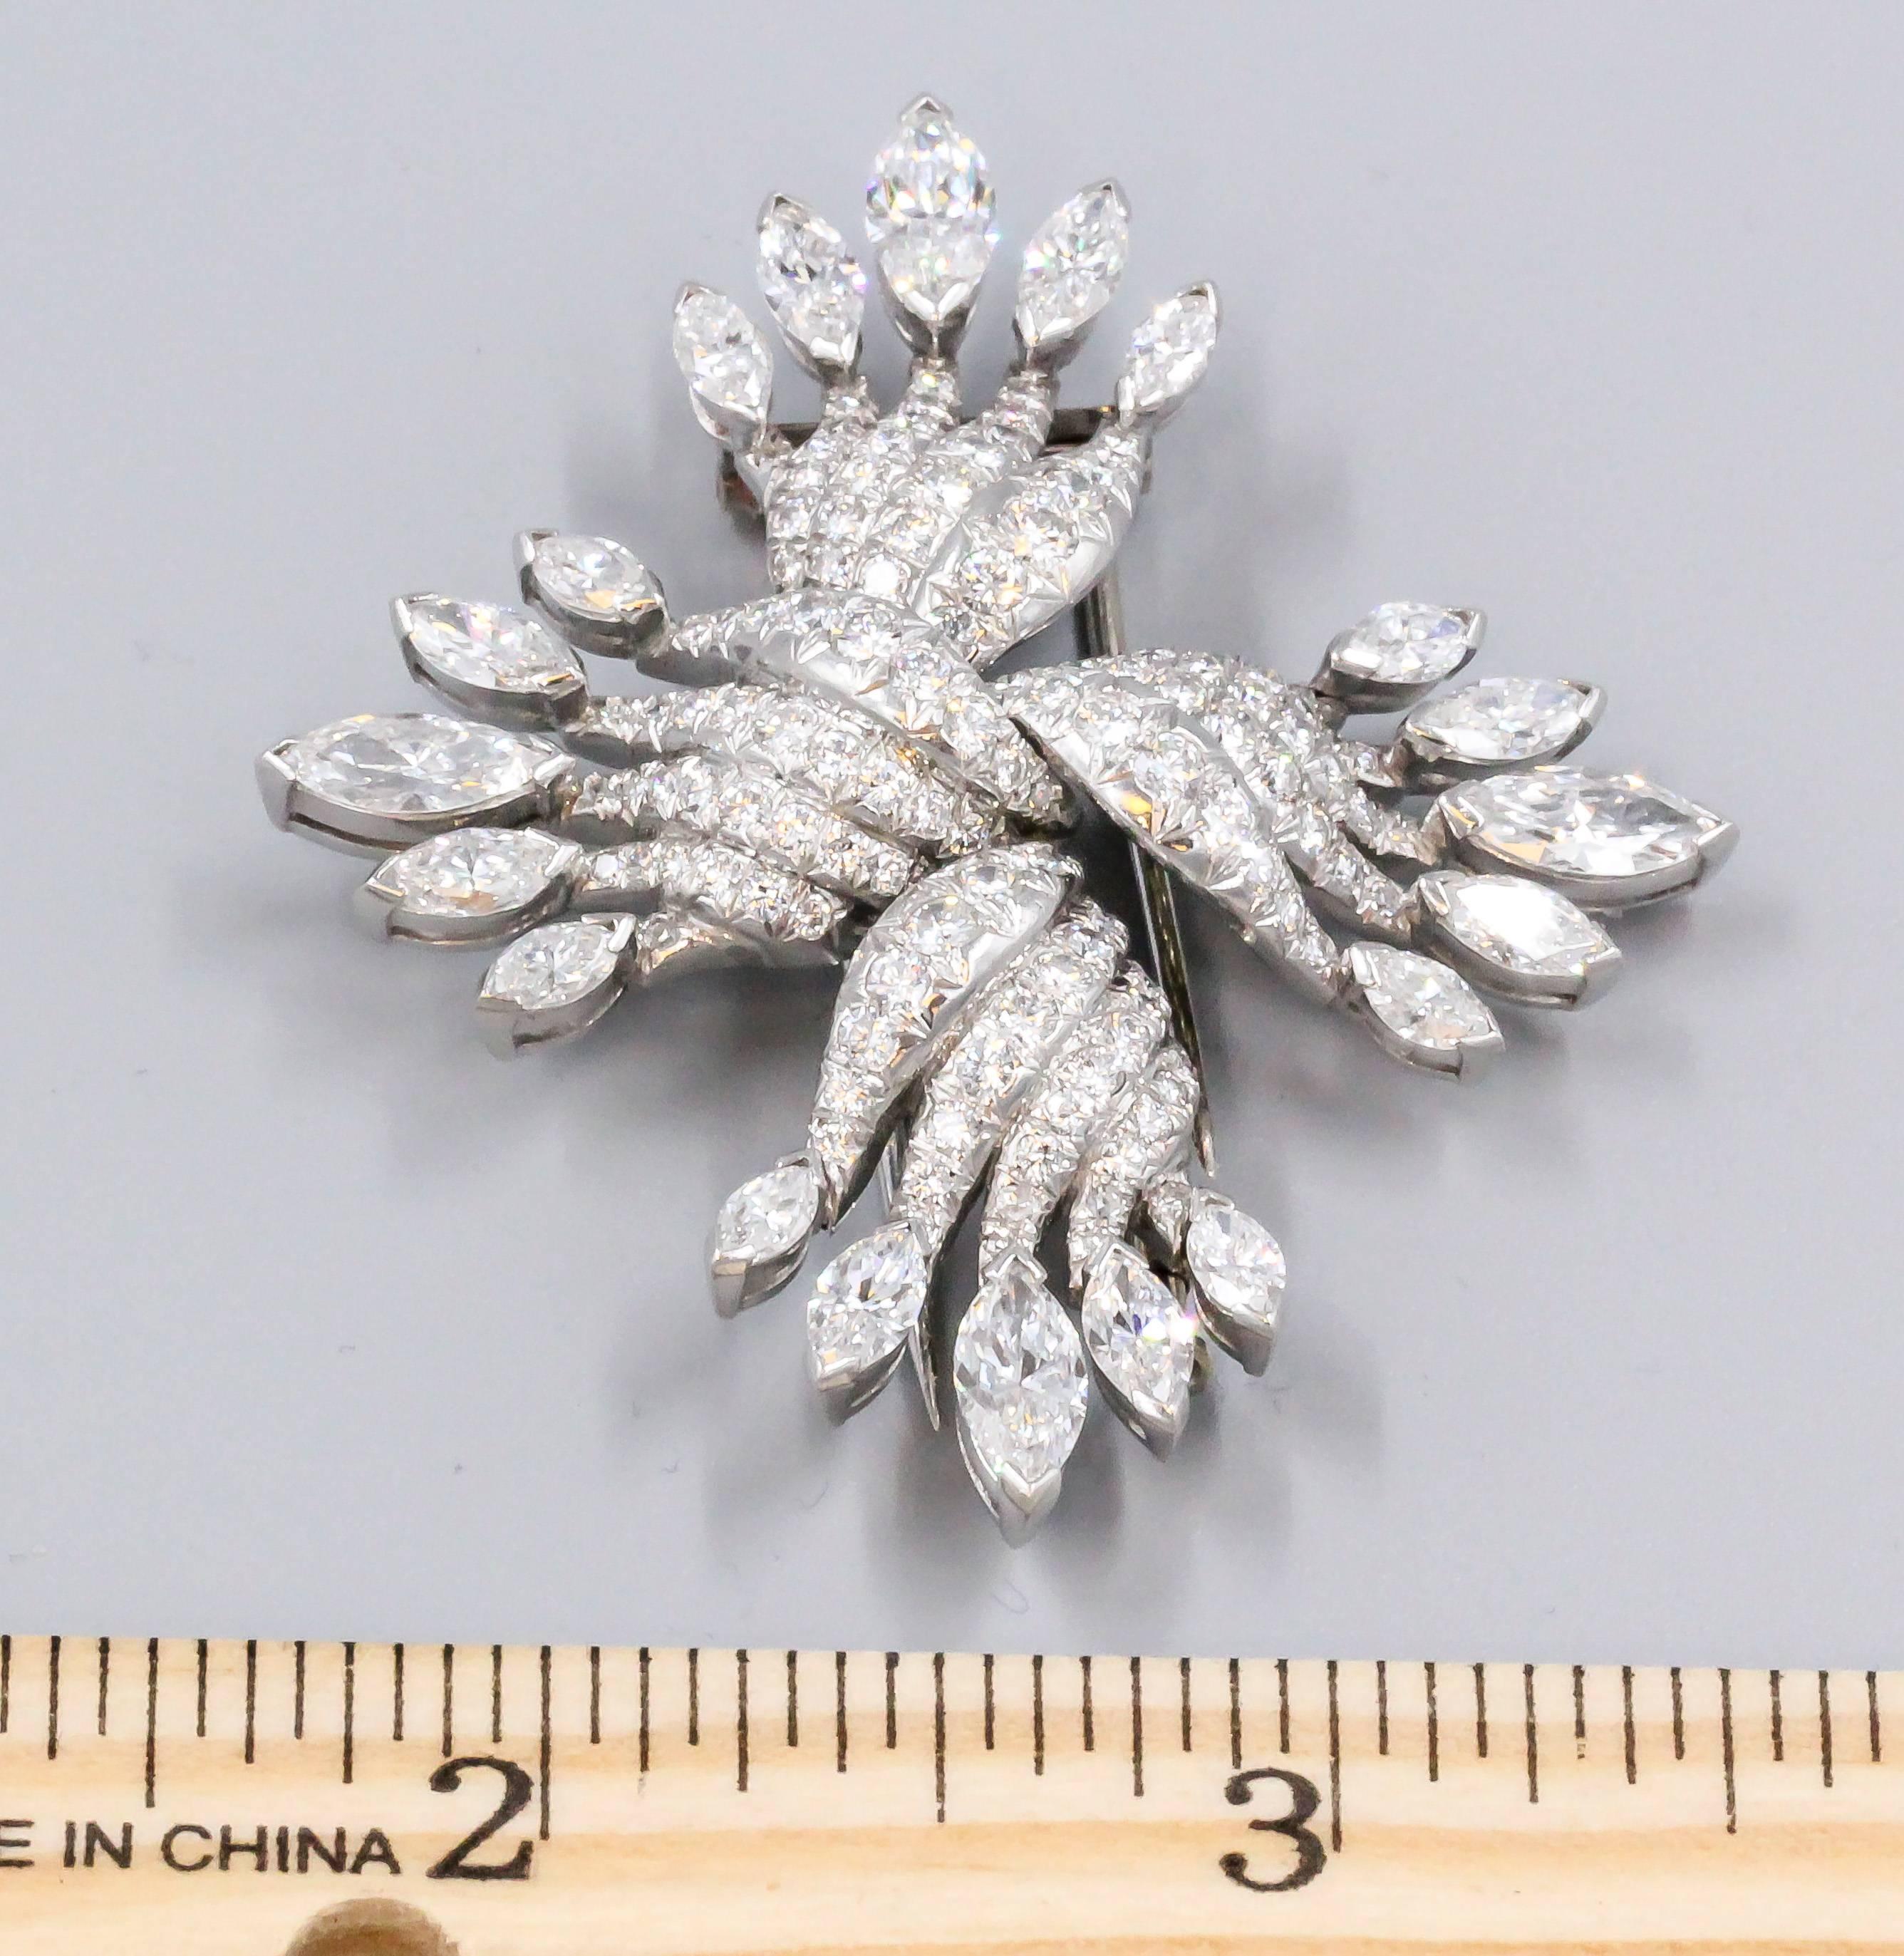 Chic diamond and platinum brooch by Tiffany & Co. Schlumberger. It features very high grade round brilliant cut and marquise cut diamonds, approx. 12.0 carats of total diamond weight. Beautifully crafted with an elegant design that features four